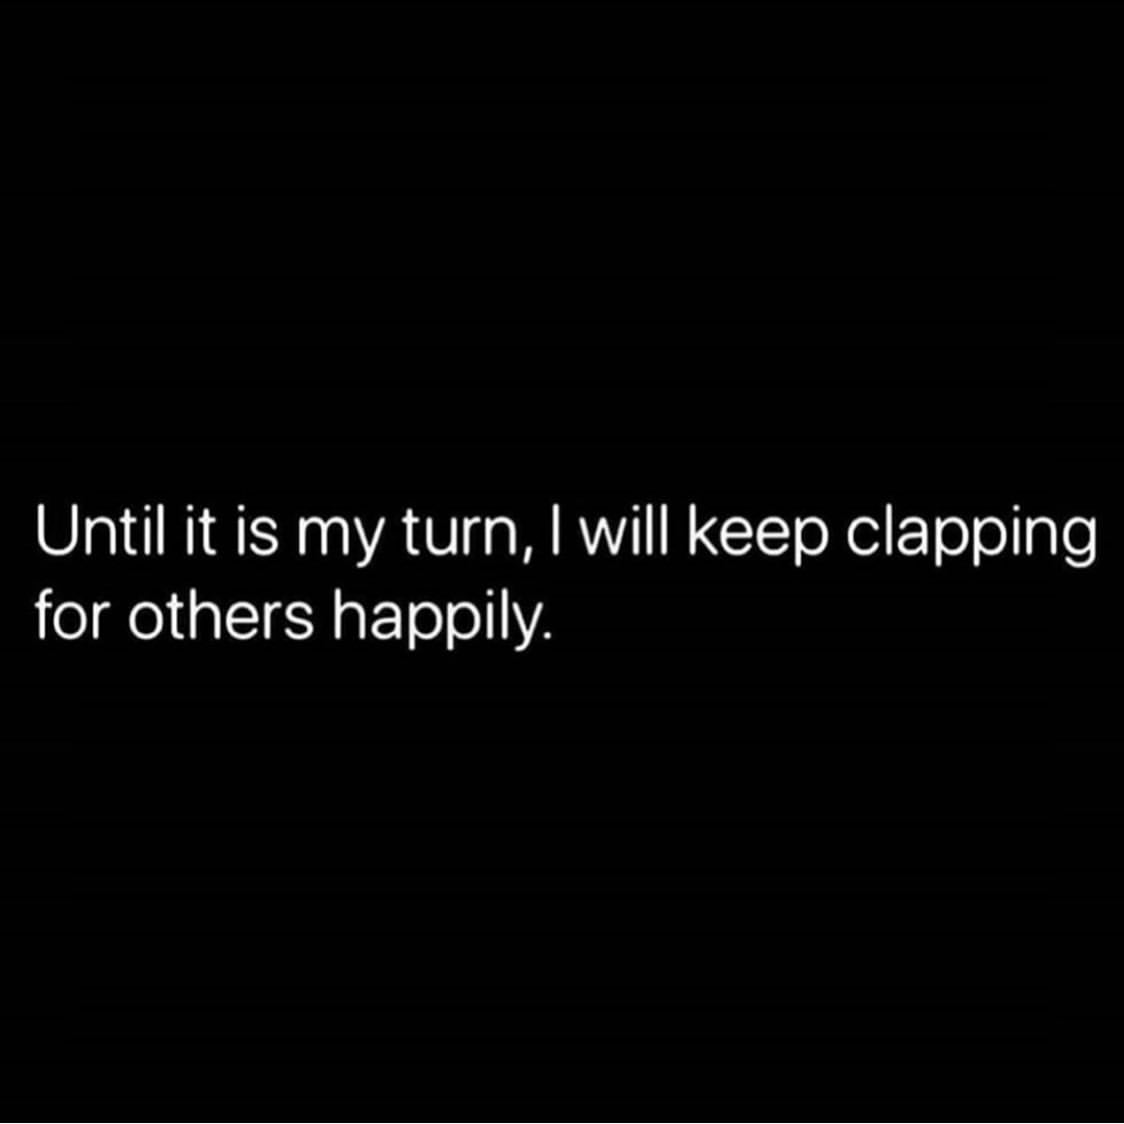 Until it is my turn, I will keep clapping for others happily.